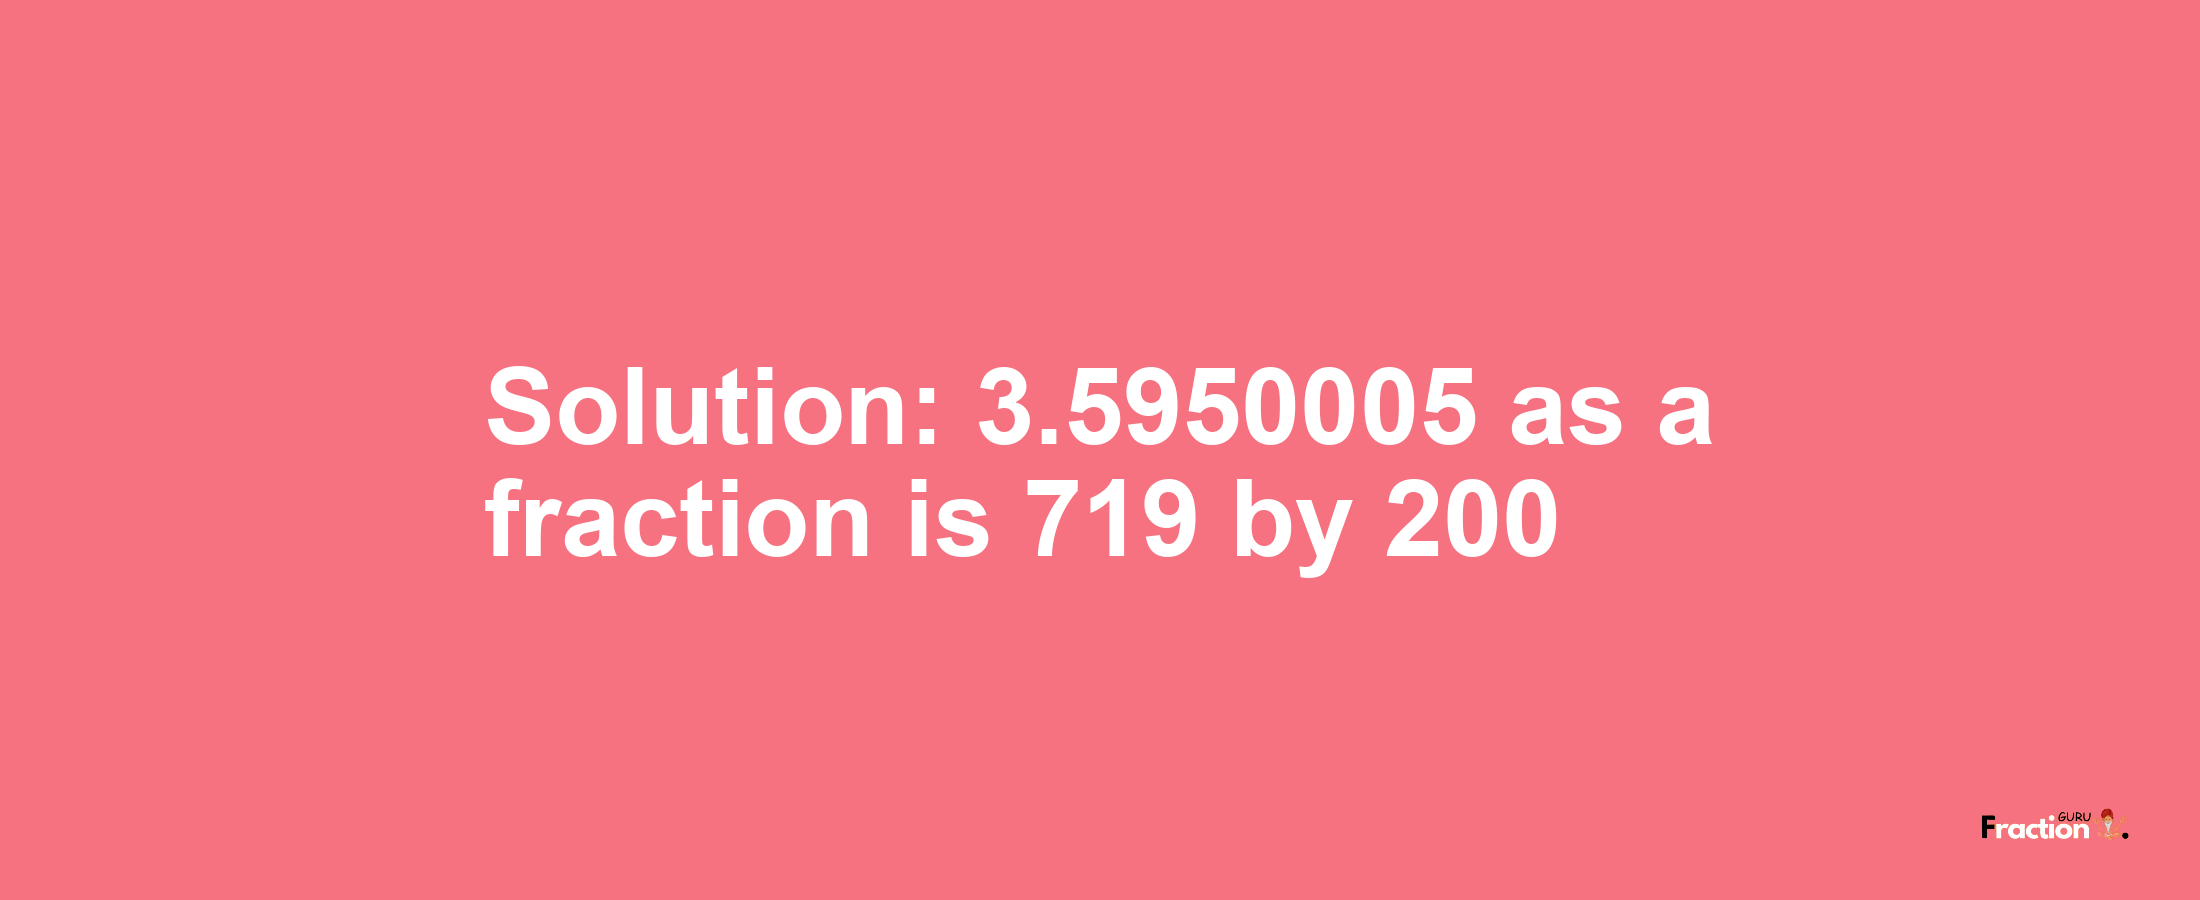 Solution:3.5950005 as a fraction is 719/200